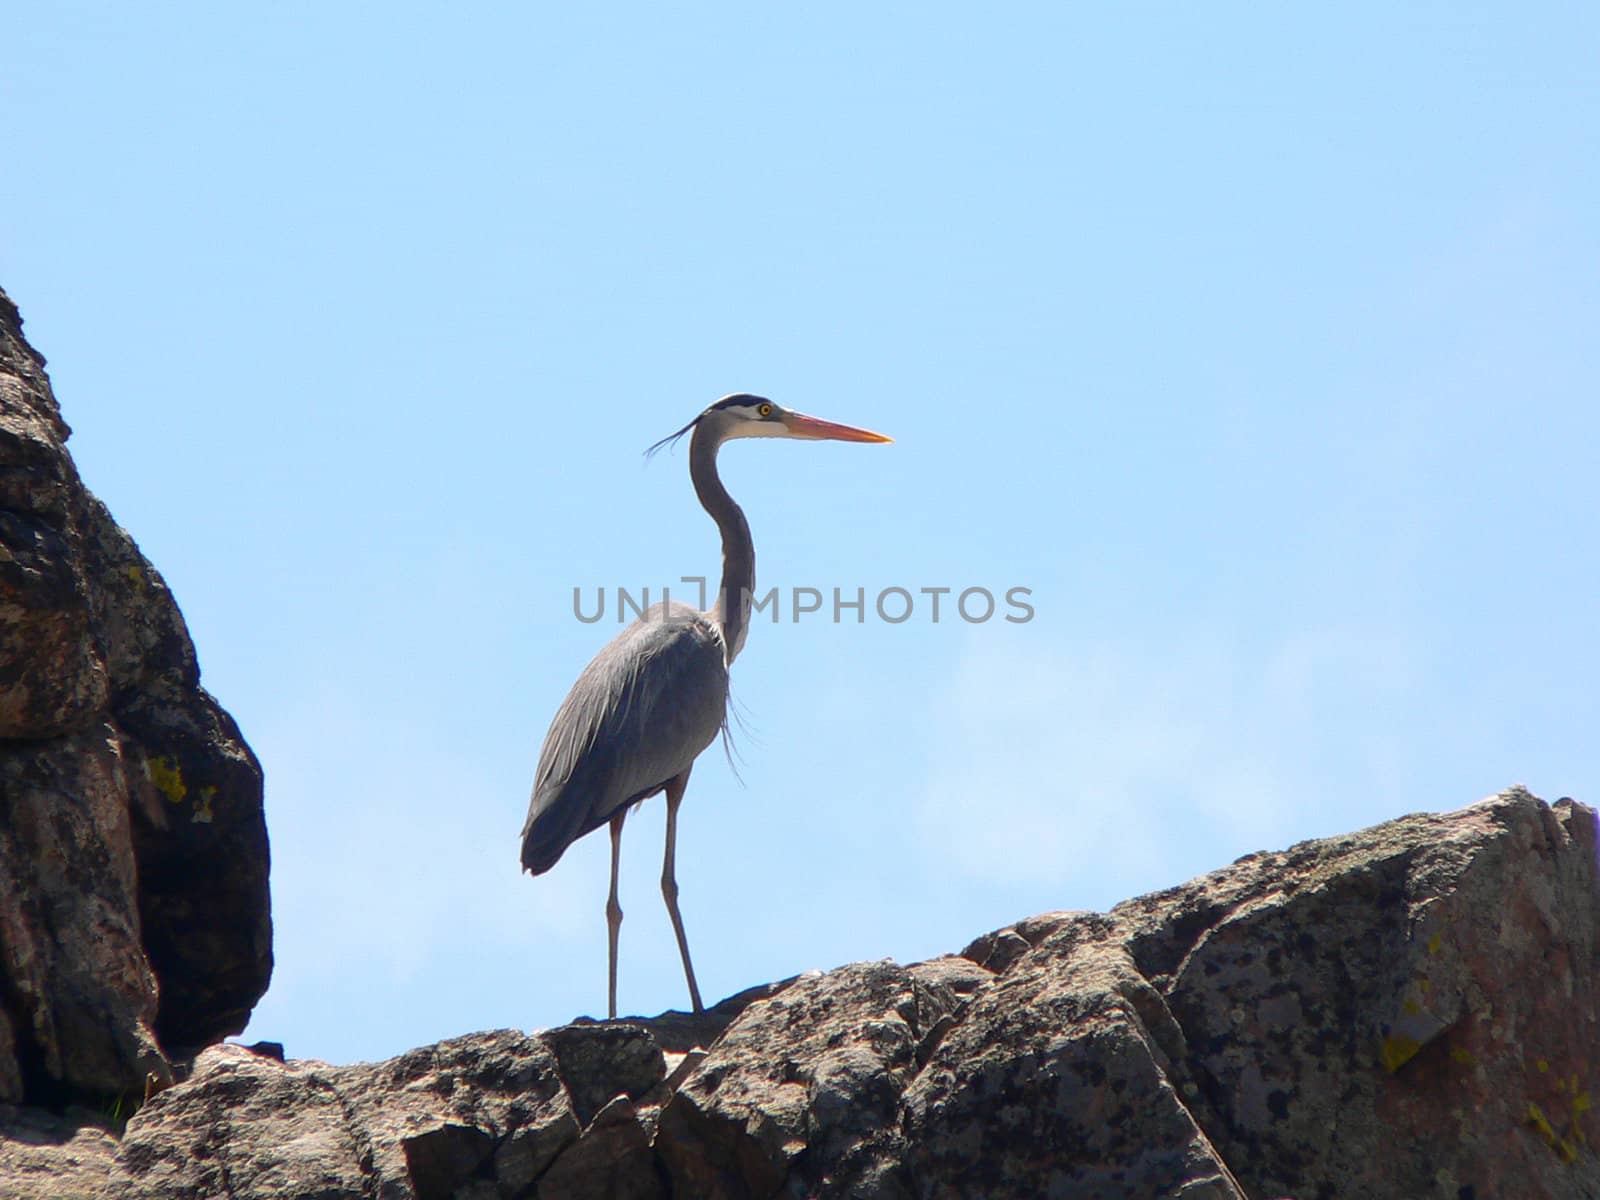 A great blue heron standing on a rock looking out over the landscape.